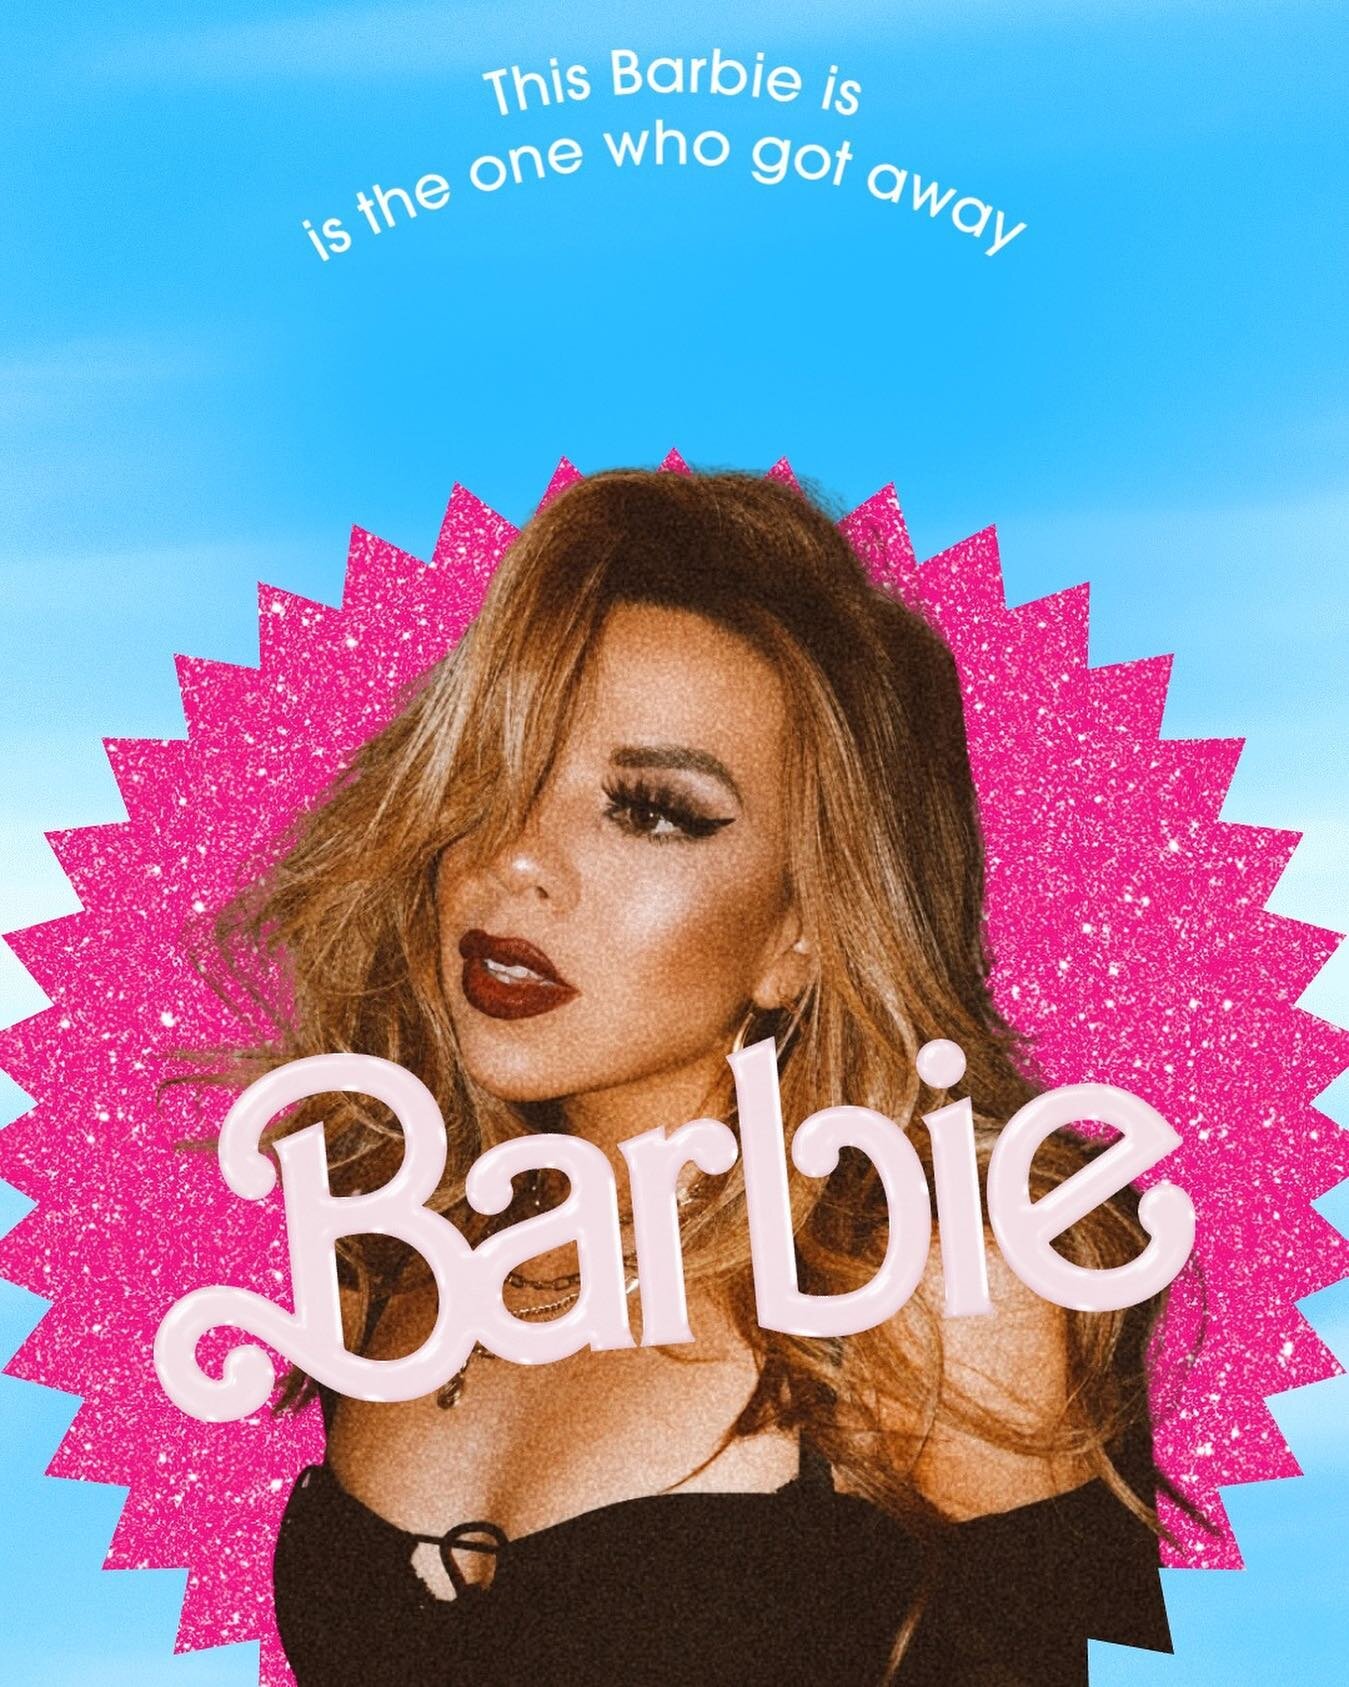 this Barbie is the one who got away ✨🌺🌴✨🤍 feeling all the love from the new single 🥹

#theonewhogotaway #barbie #latina #single #newmusic #musician #artist #popartist #popmusic #dancemusic #nashville #popstar #latinaartist #latinpop #independenta